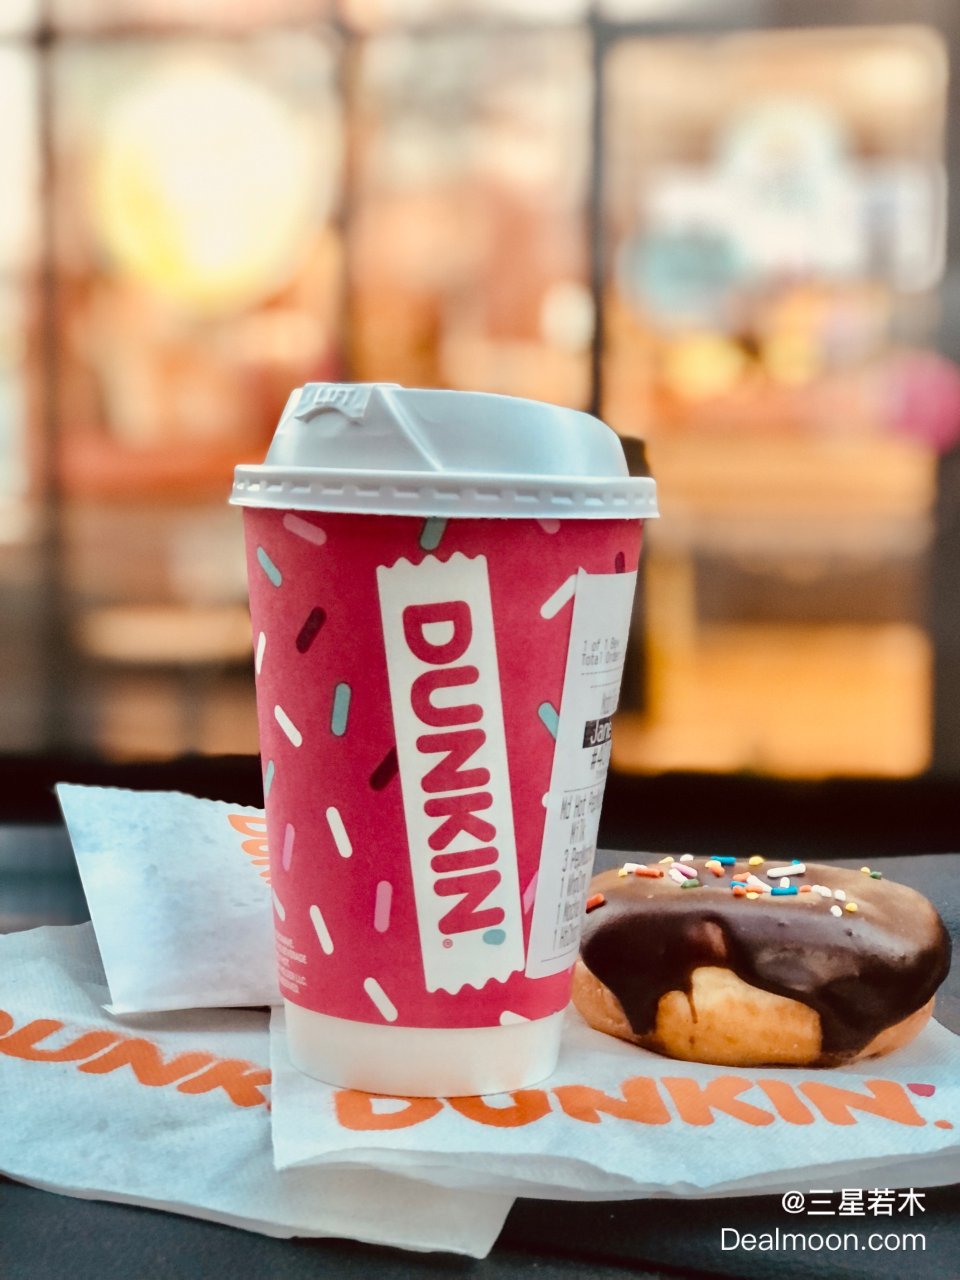 Dunkin' Donuts,Gift the Joy of Donuts with Dunkin’®: “Free Donut Wednesdays” Return with the Debut of the Holiday Menu | Dunkin'